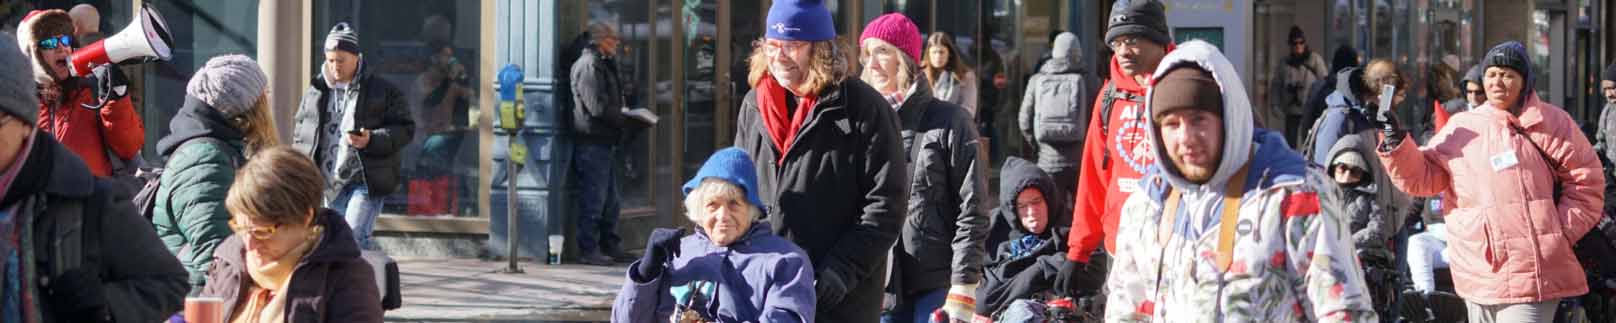 People with and without disabilities bundled up because of the cold walking along a sidewalk as part of a demonstration.